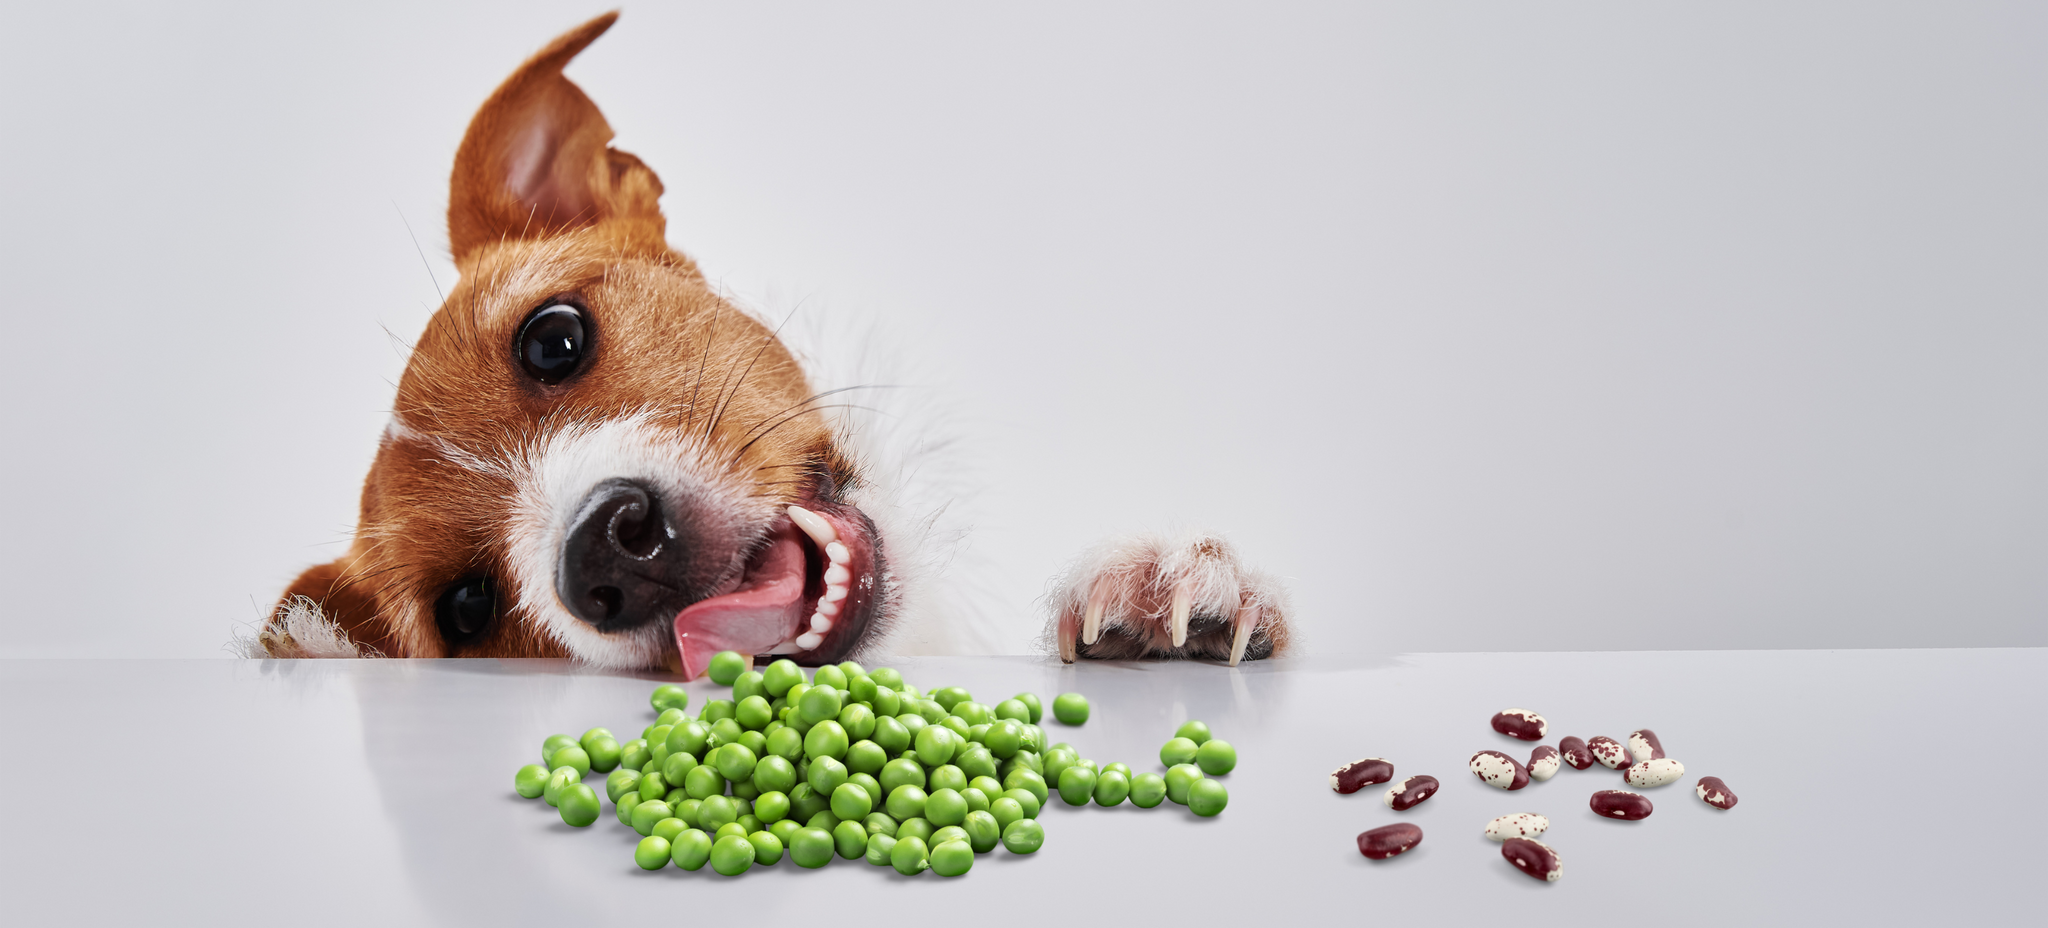 Legumes not linked to DCM in dogs: New Study